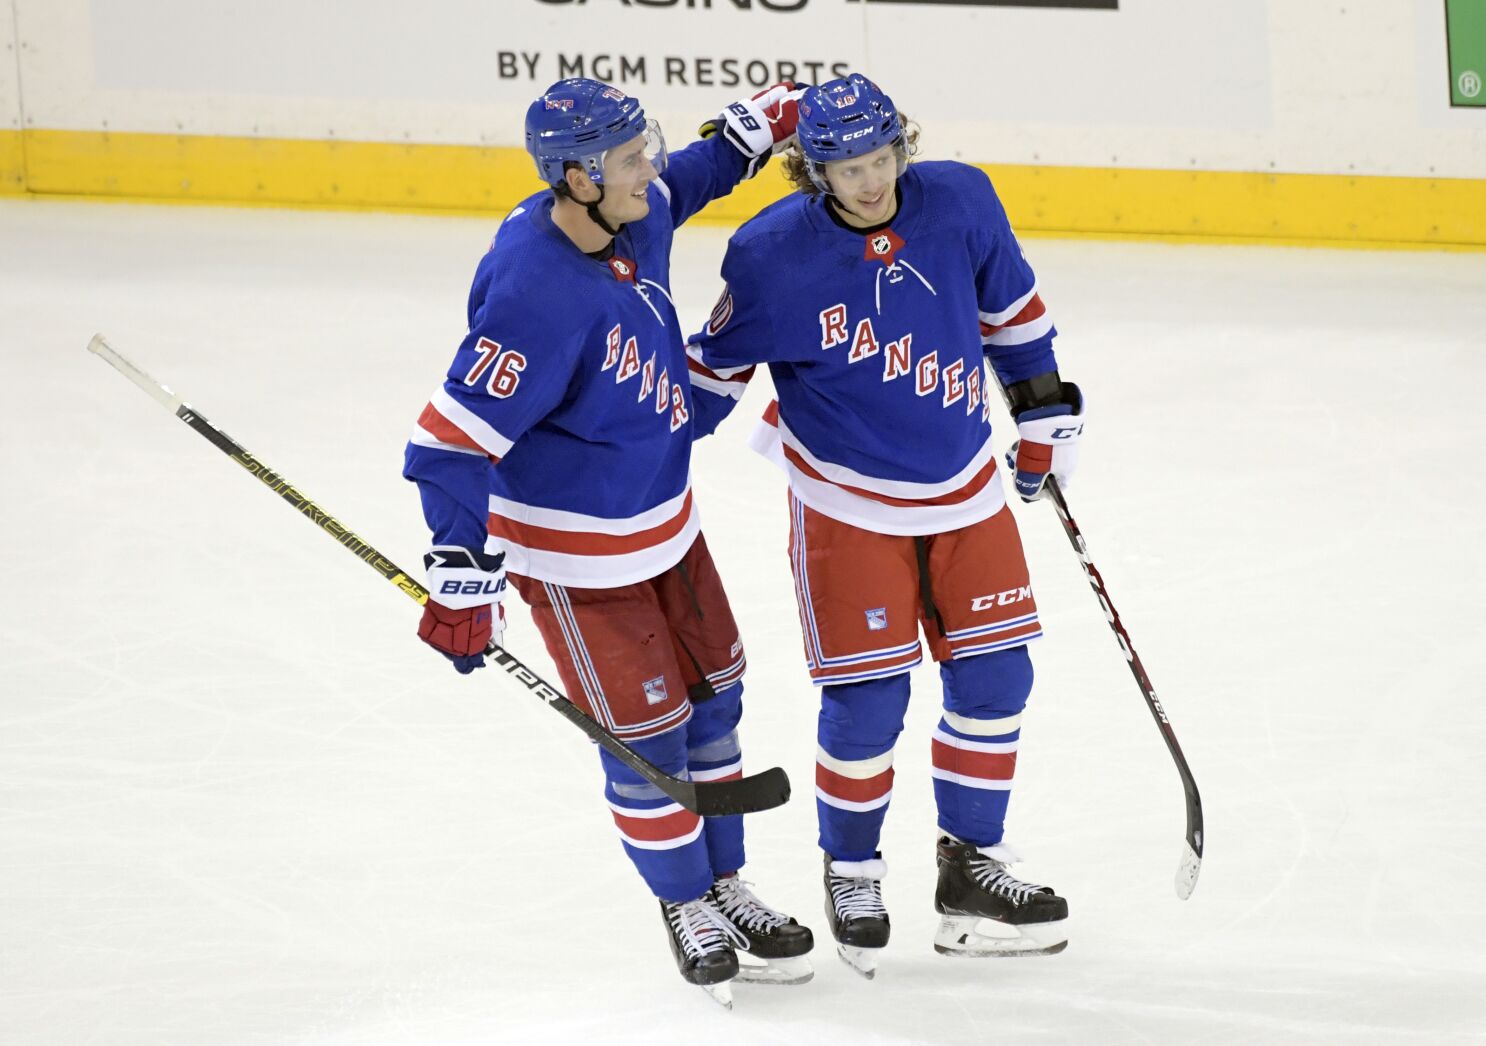 With Artemi Panarin out, NY Rangers fall to Islanders